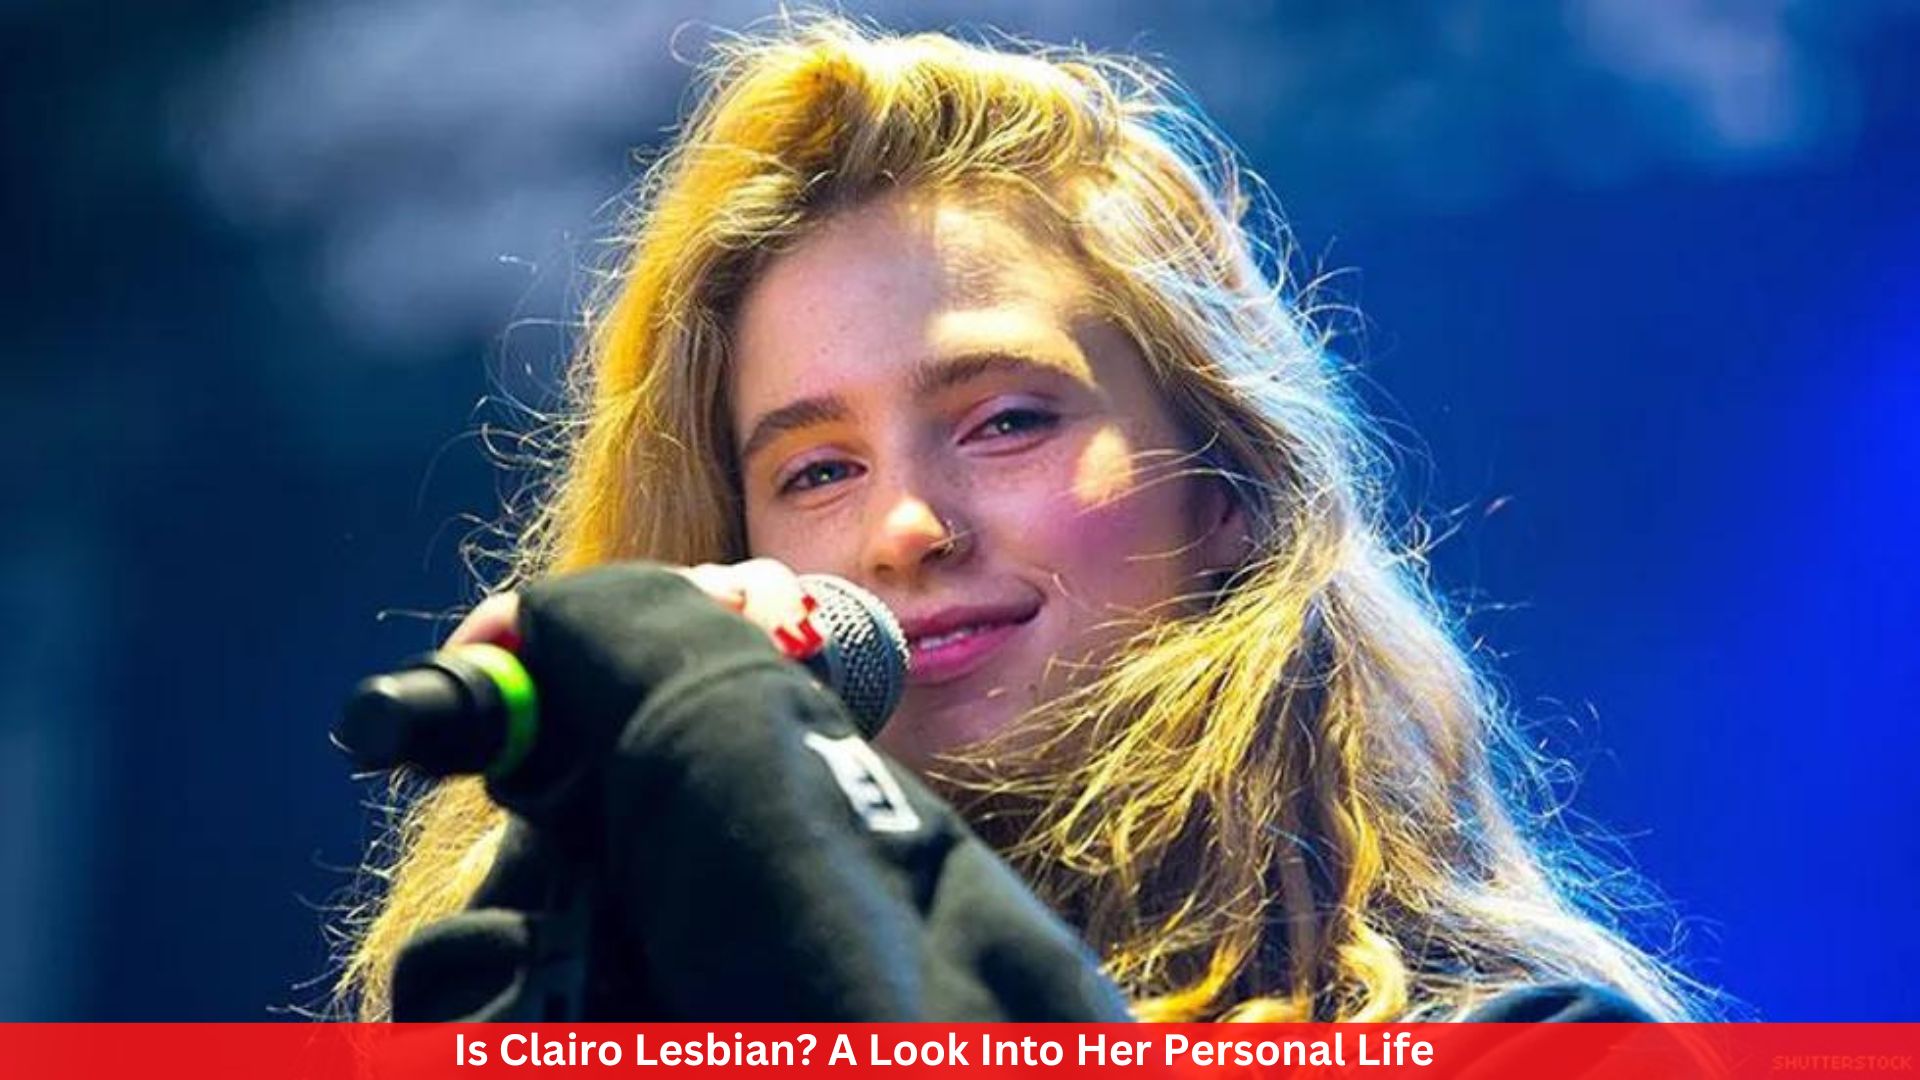 Is Clairo Lesbian? A Look Into Her Personal Life